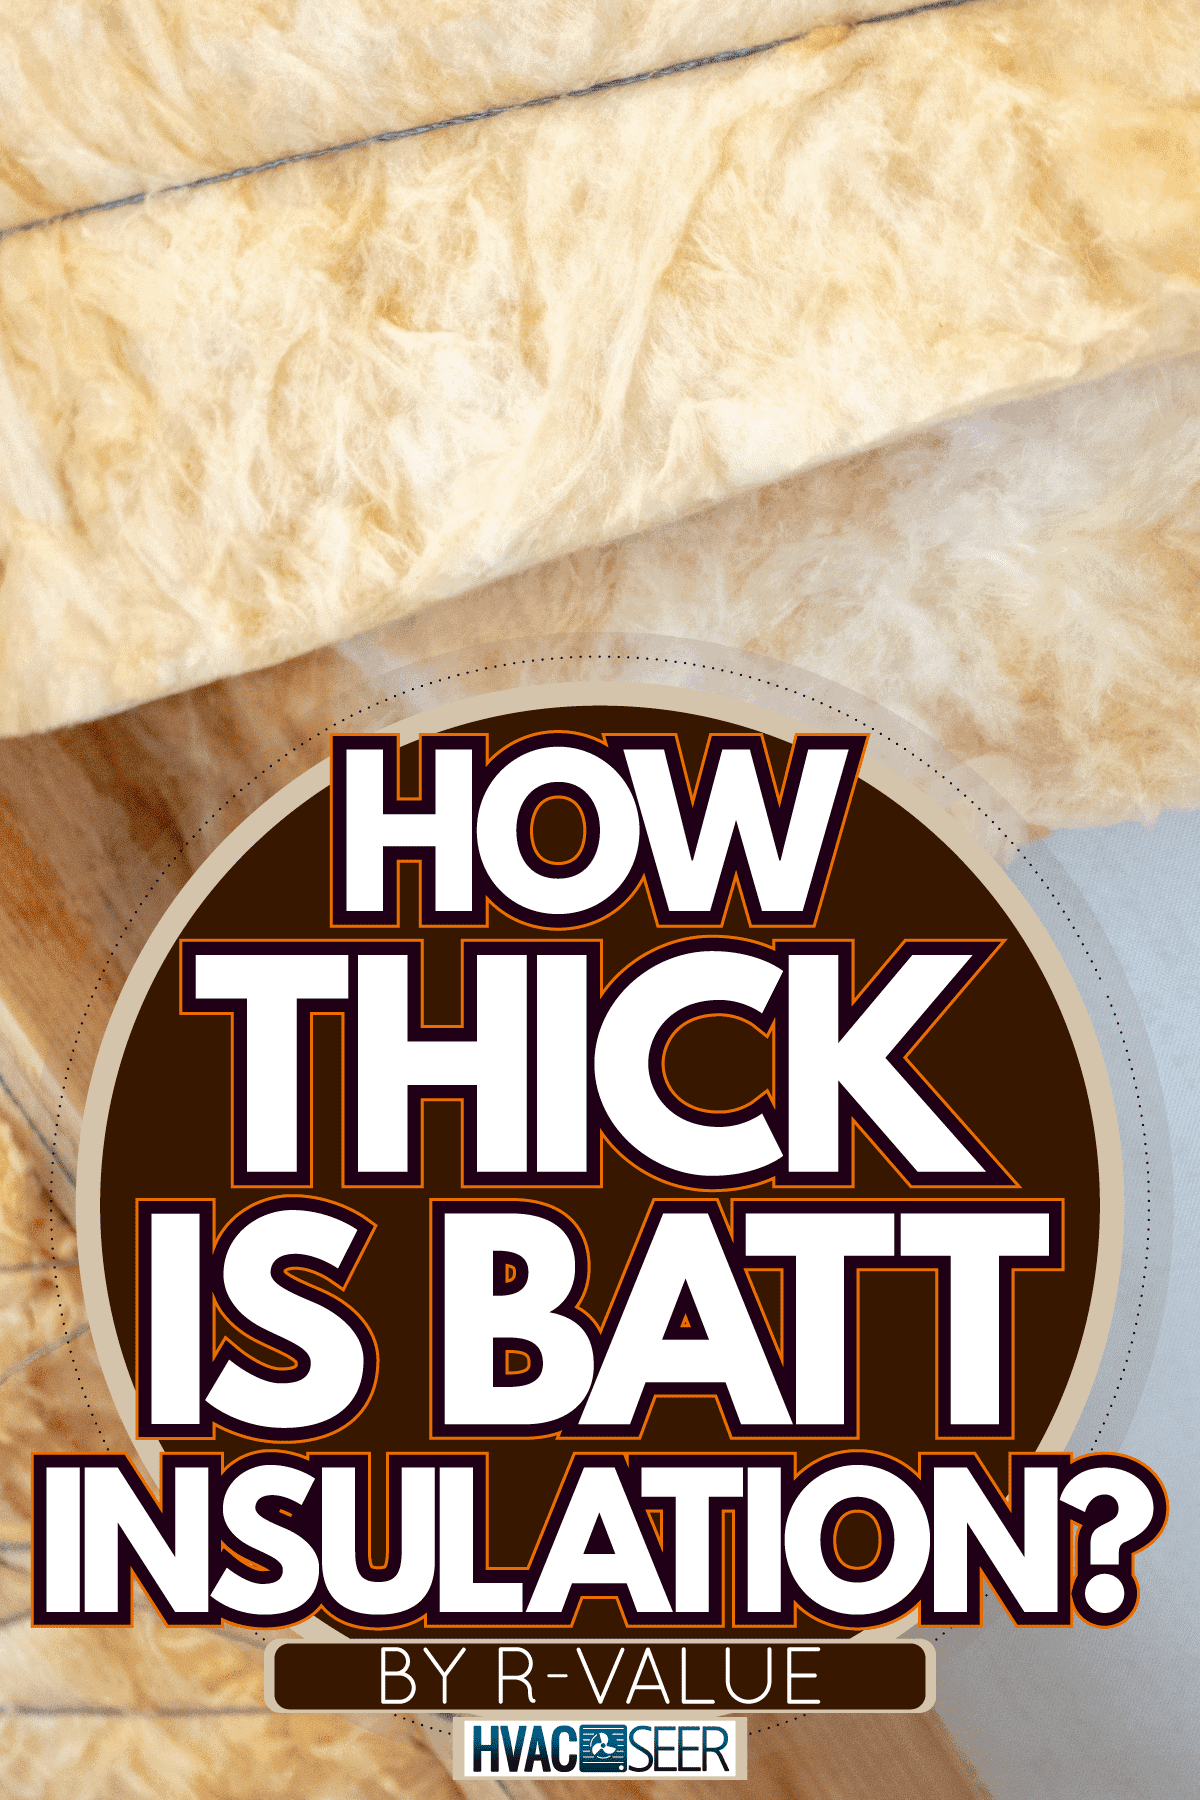 Batt insulation attached to the ceiling of a house, How Thick Is Batt Insulation? [By R-Value]